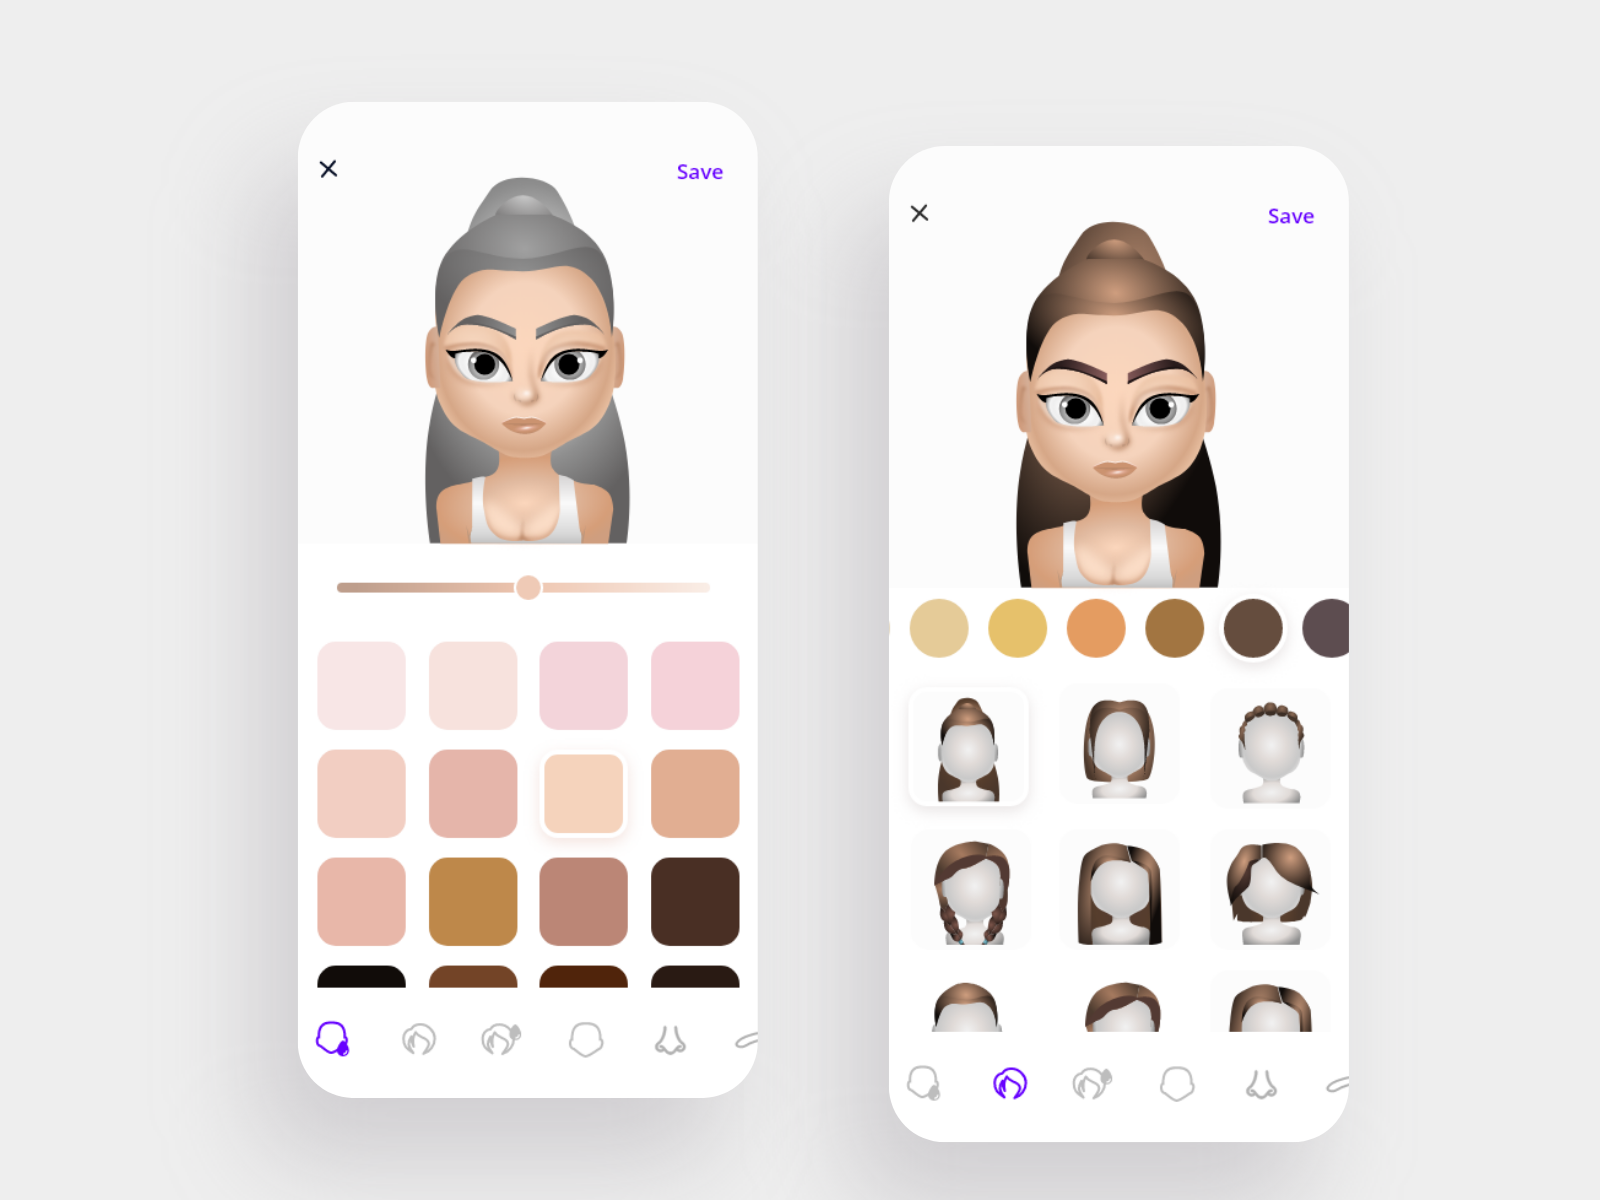 Character Customization Interface - Mobile by Paola Ascanio on Dribbble